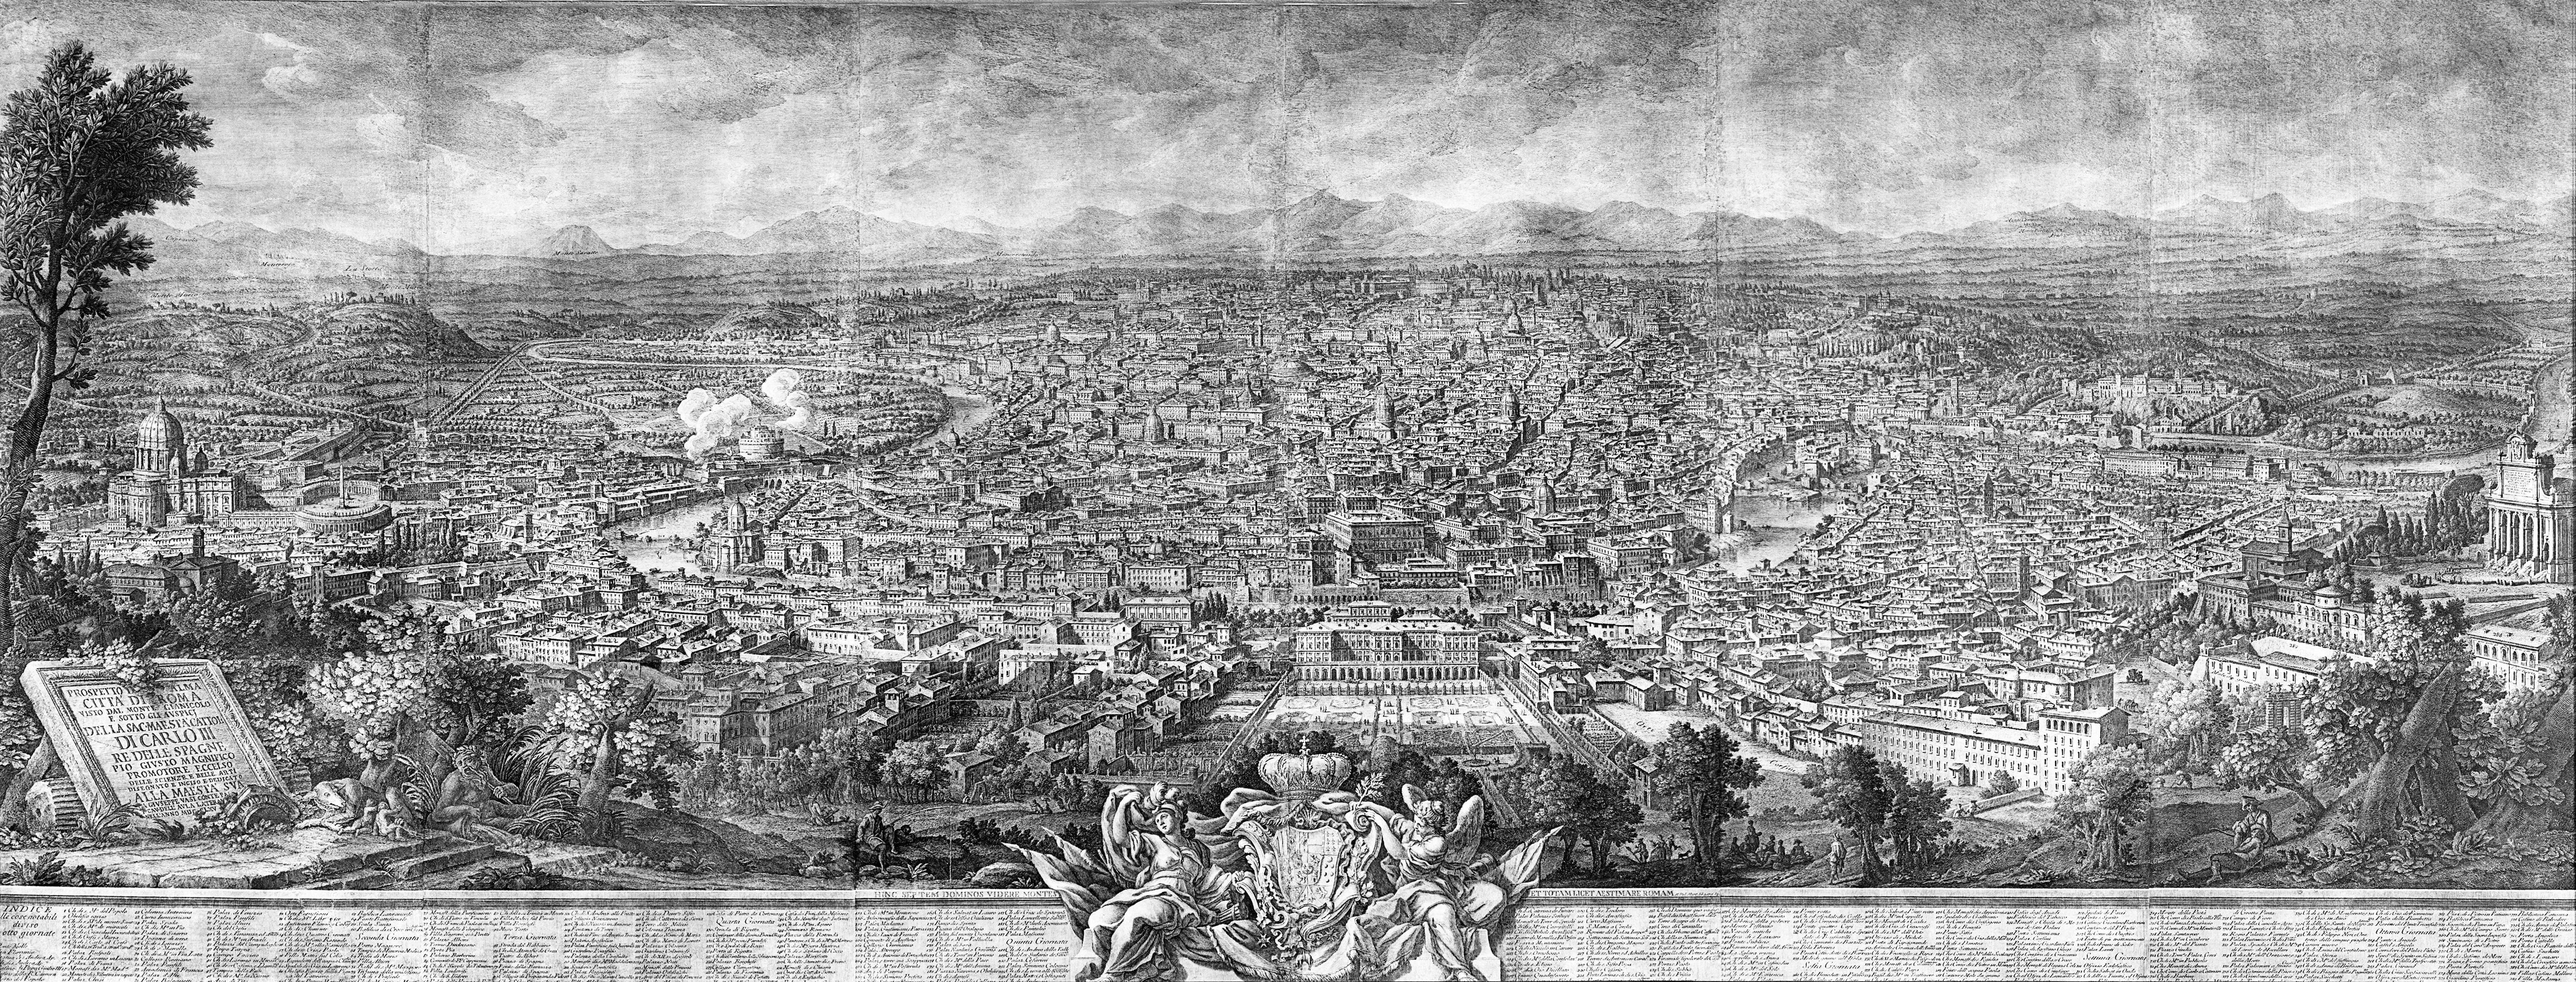 Giuseppe Vasi Landscape Print - Ex-Chatsworth House, Monumental, 9 Foot Long, 1765 View of Rome, Etching by Vasi